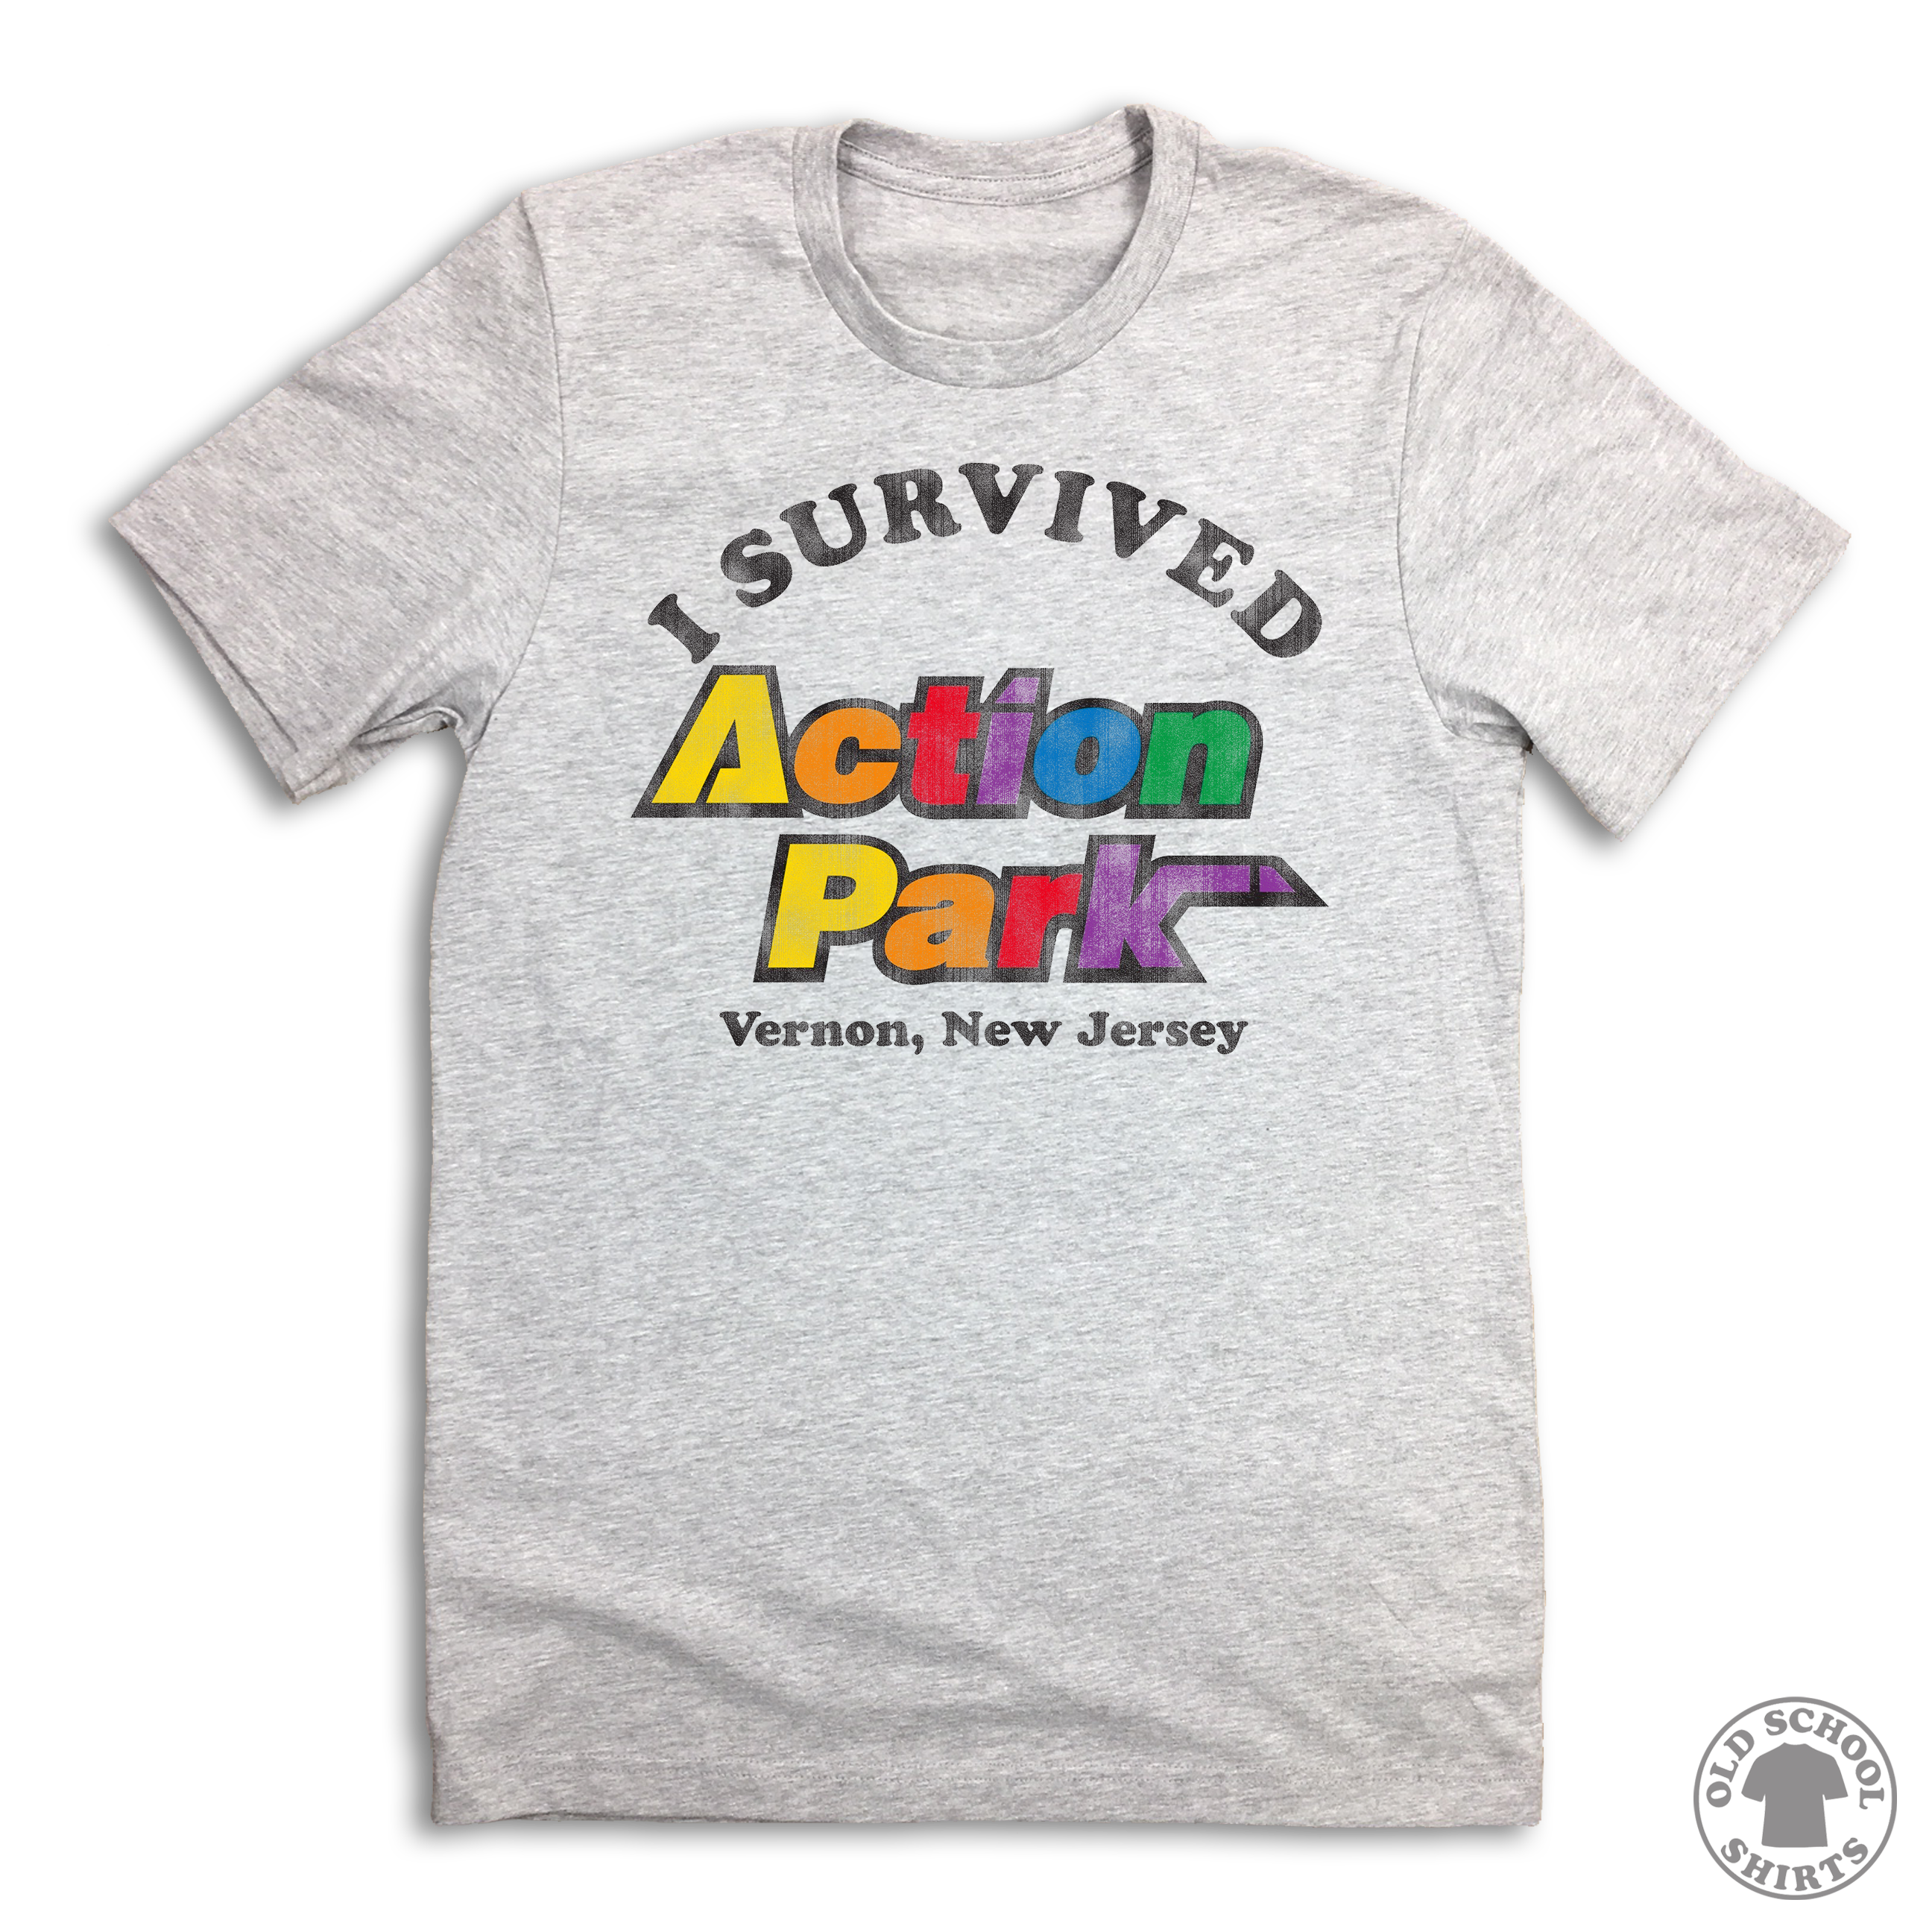 I Survived Action Park - Old School Shirts- Retro Sports T Shirts